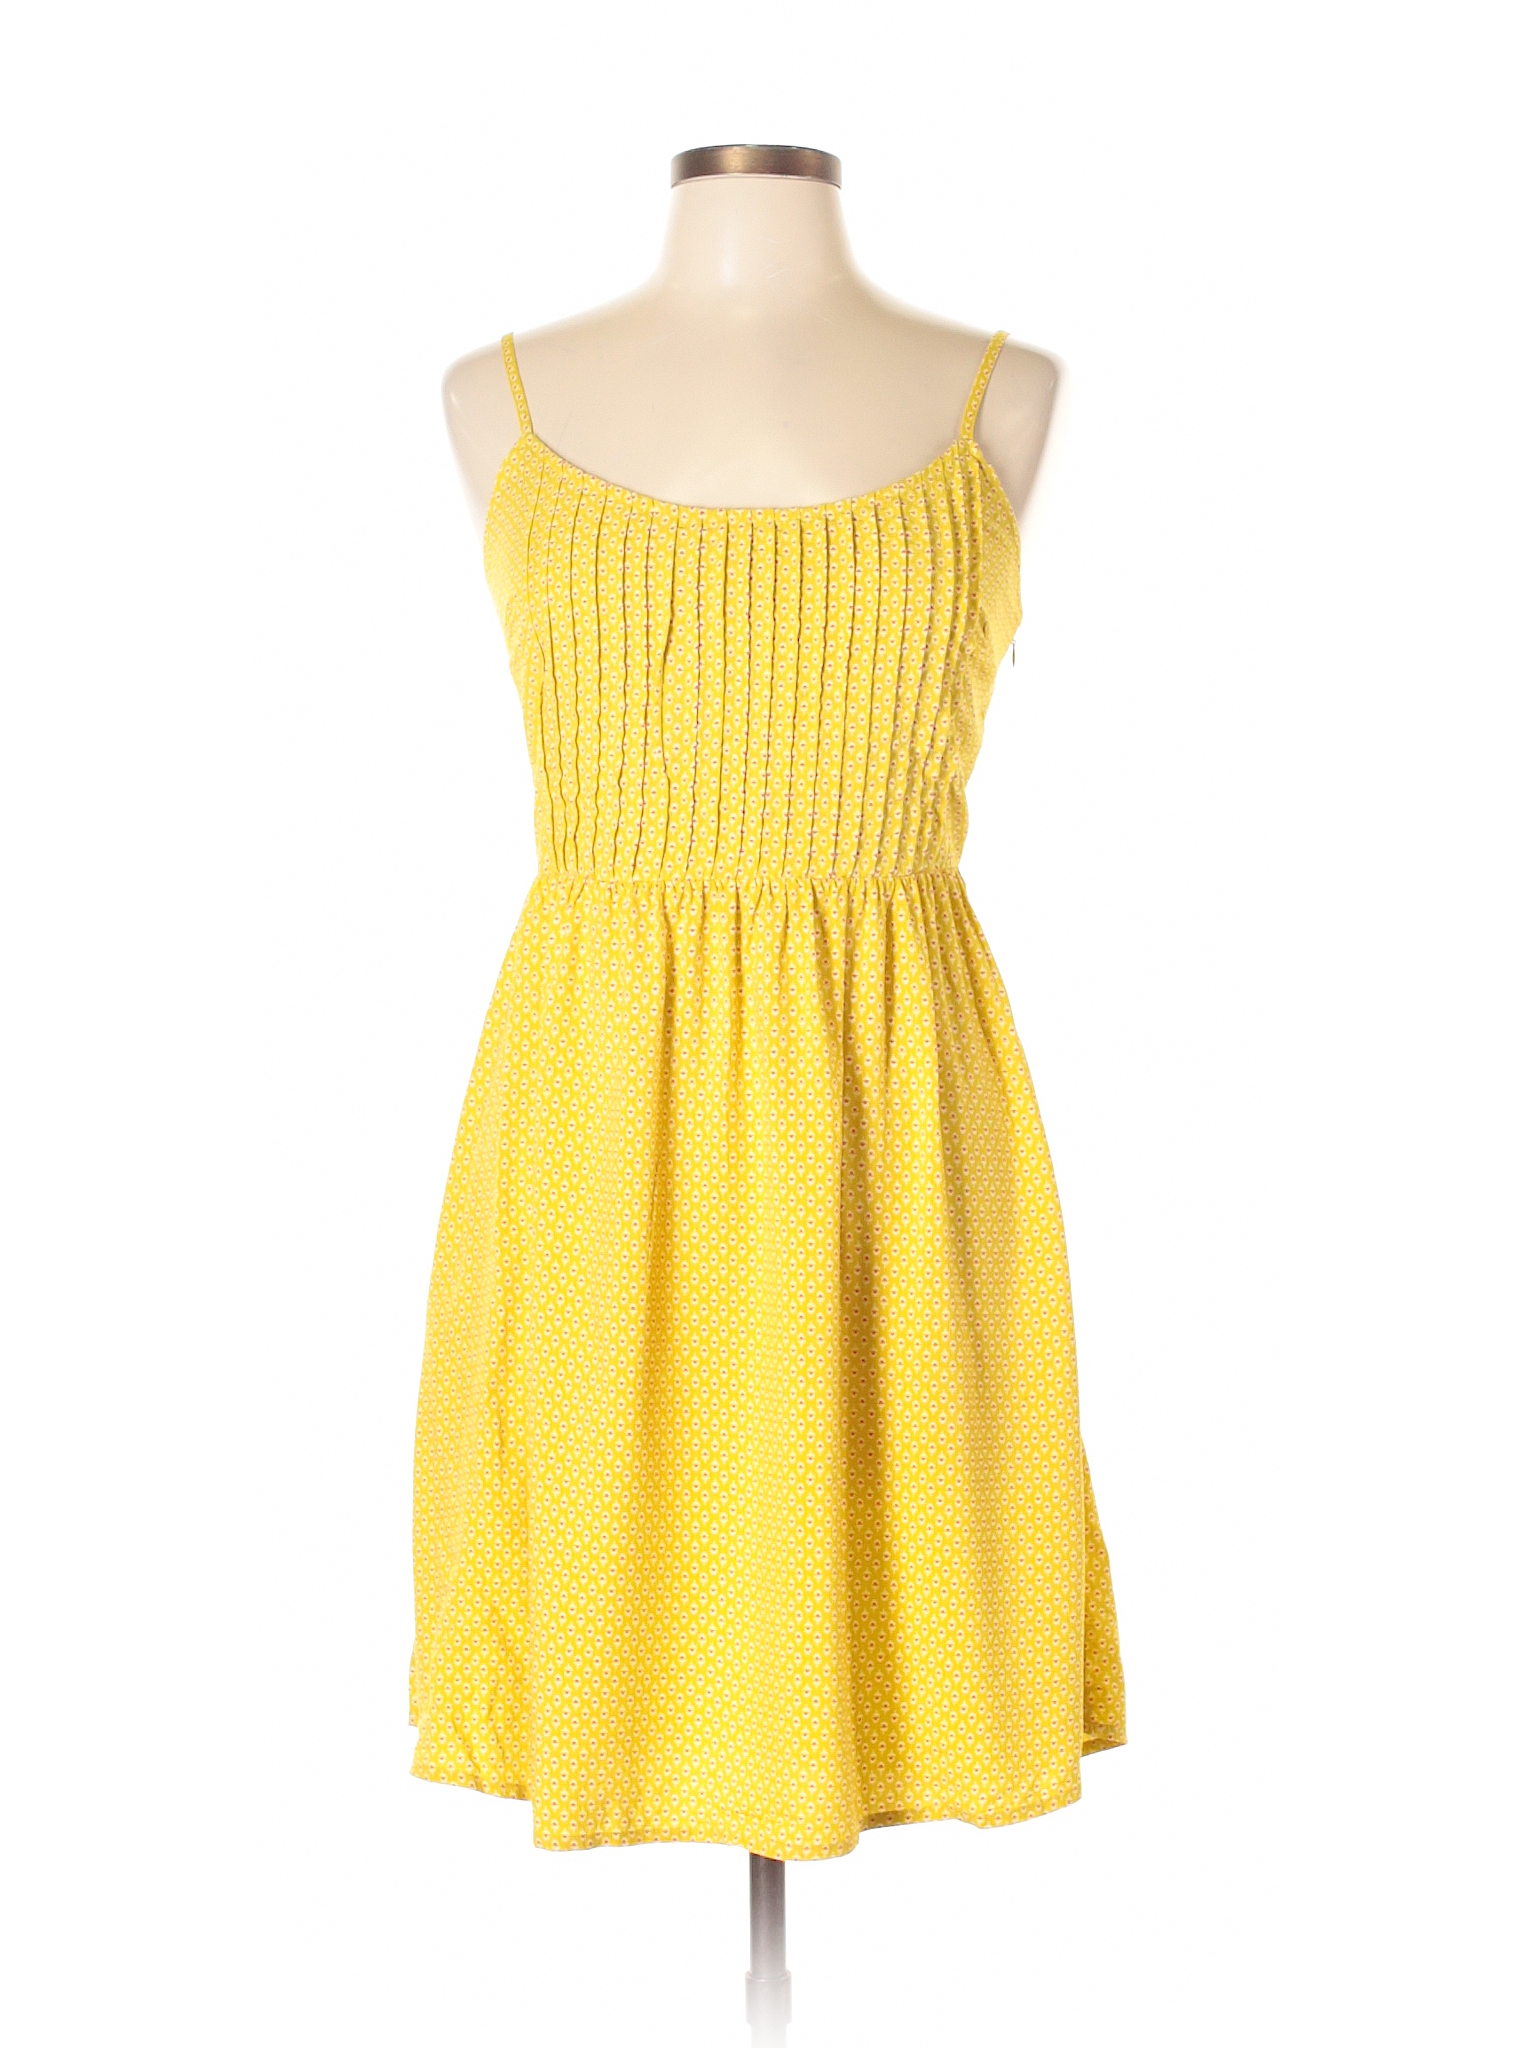 Old Navy Solid Yellow Casual Dress Size M - 54% off | thredUP